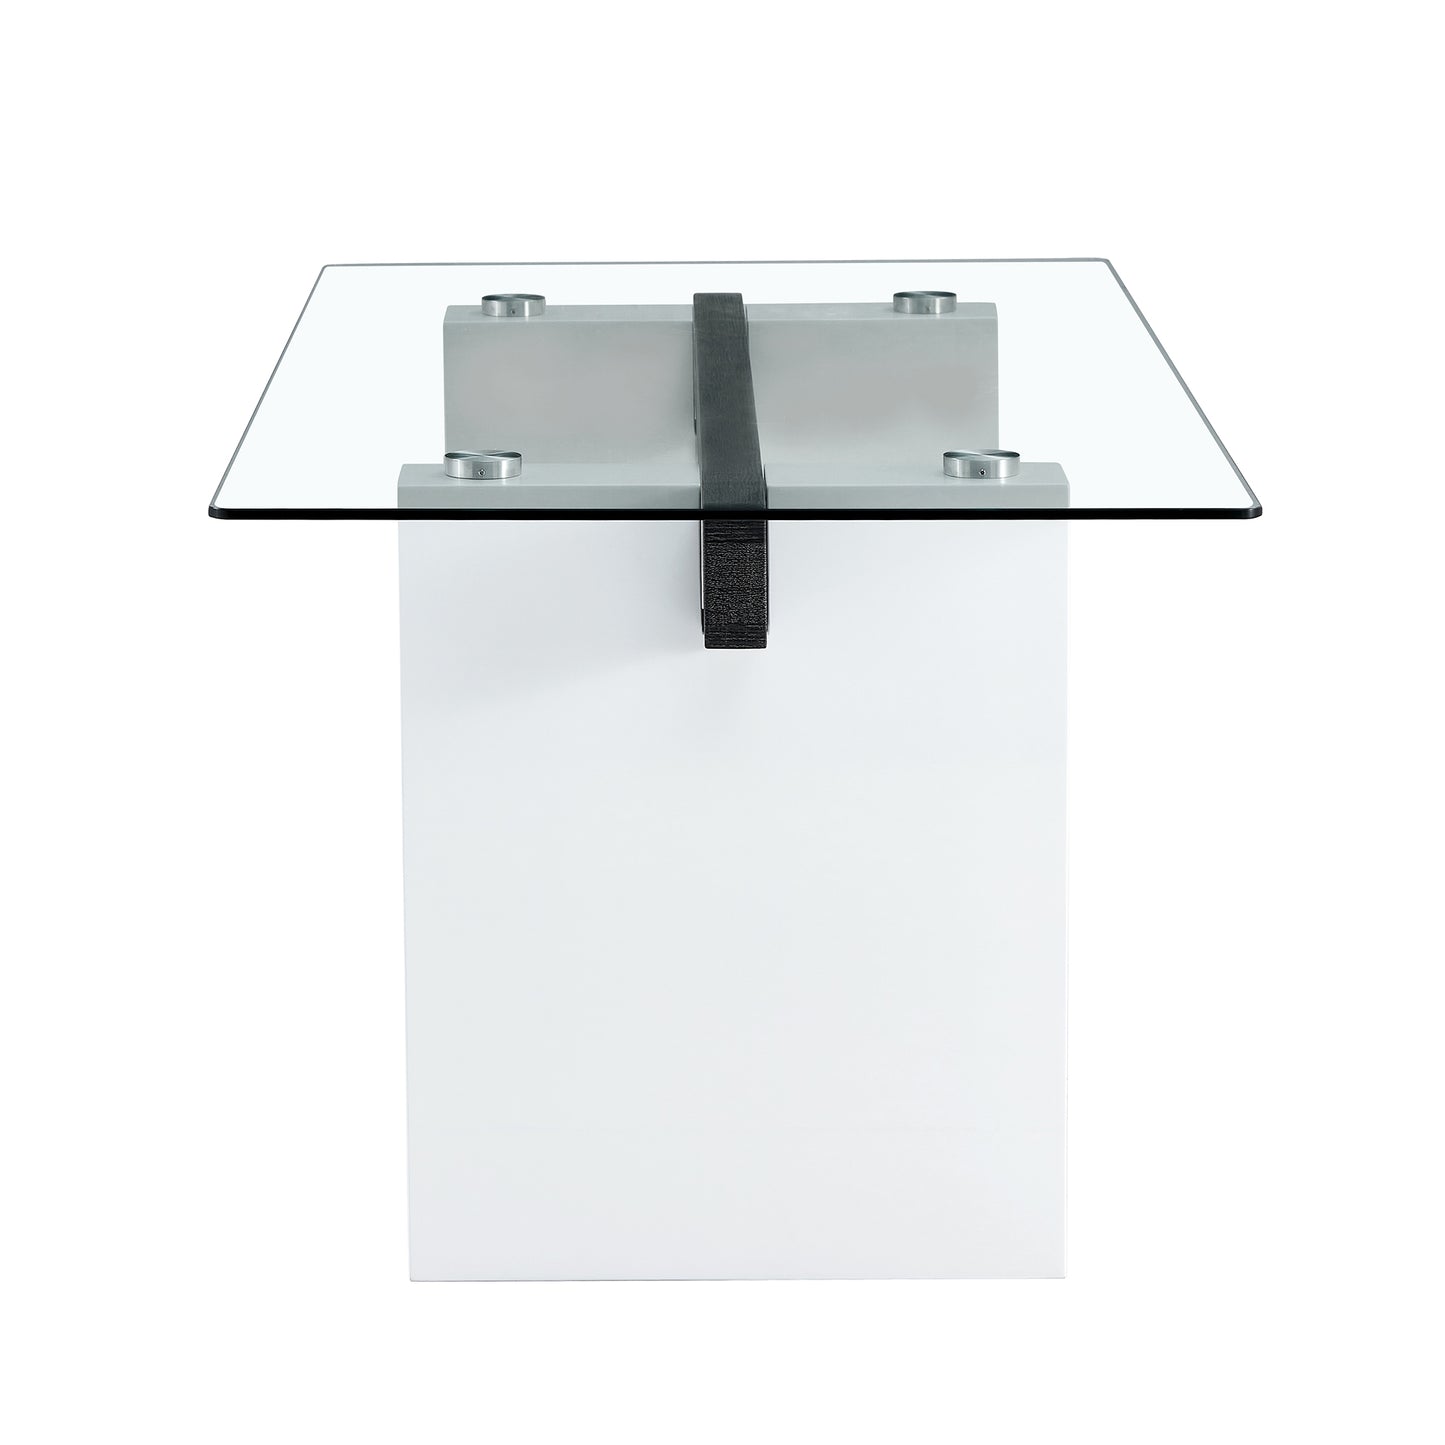 Large modern simple rectangular glass table, which can accommodate 6-8 people, equipped with 0.39-inch tempered glass table top and large MDF table legs, used for kitchen, dining room, living room1546